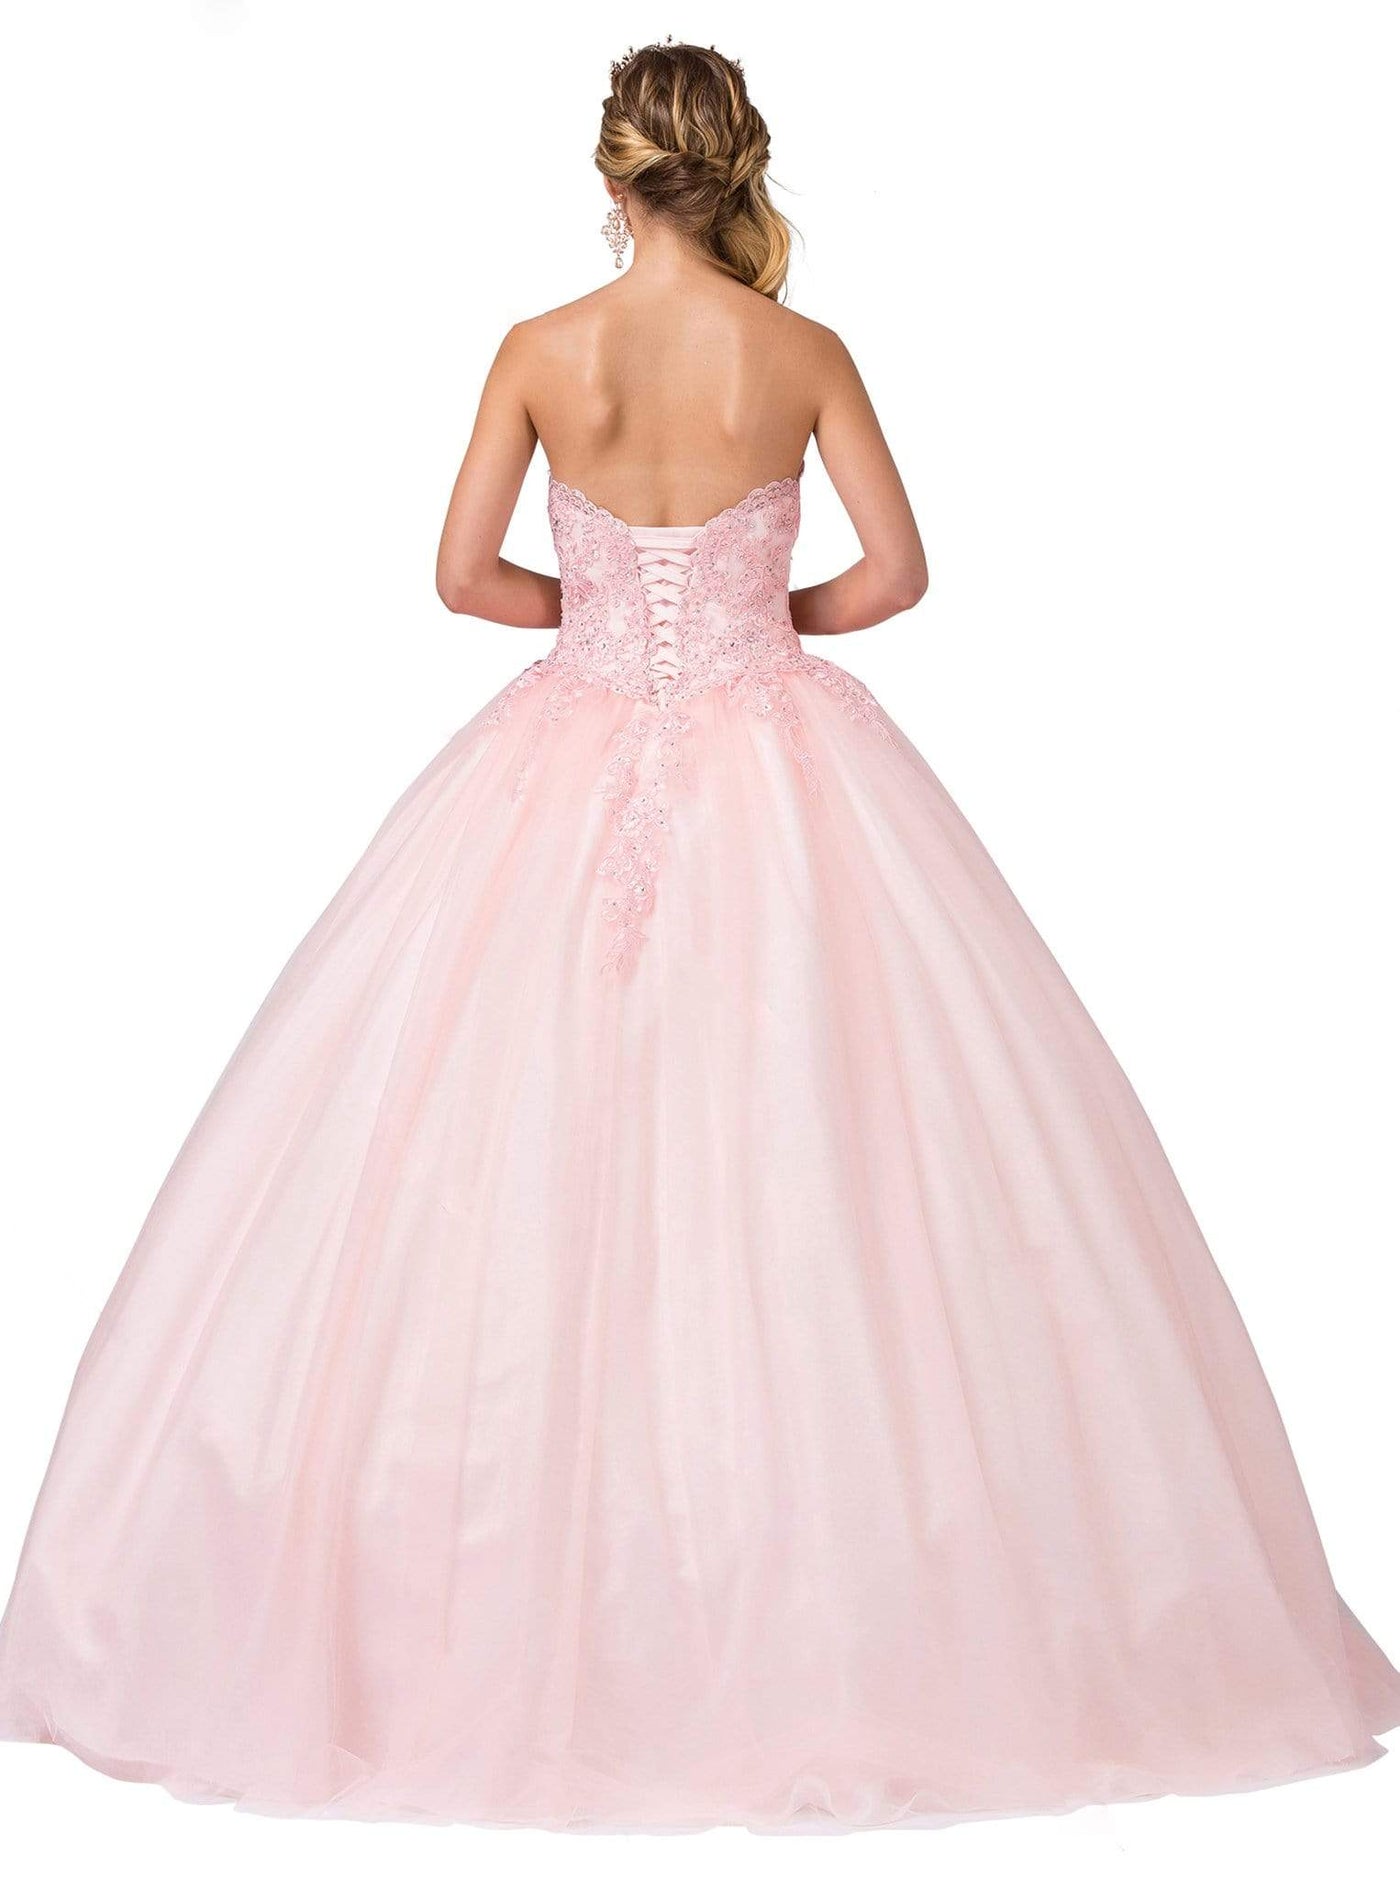 Dancing Queen - 1337 Lace Appliqued Sweetheart Bodice Ballgown Sweet 16 Dresses